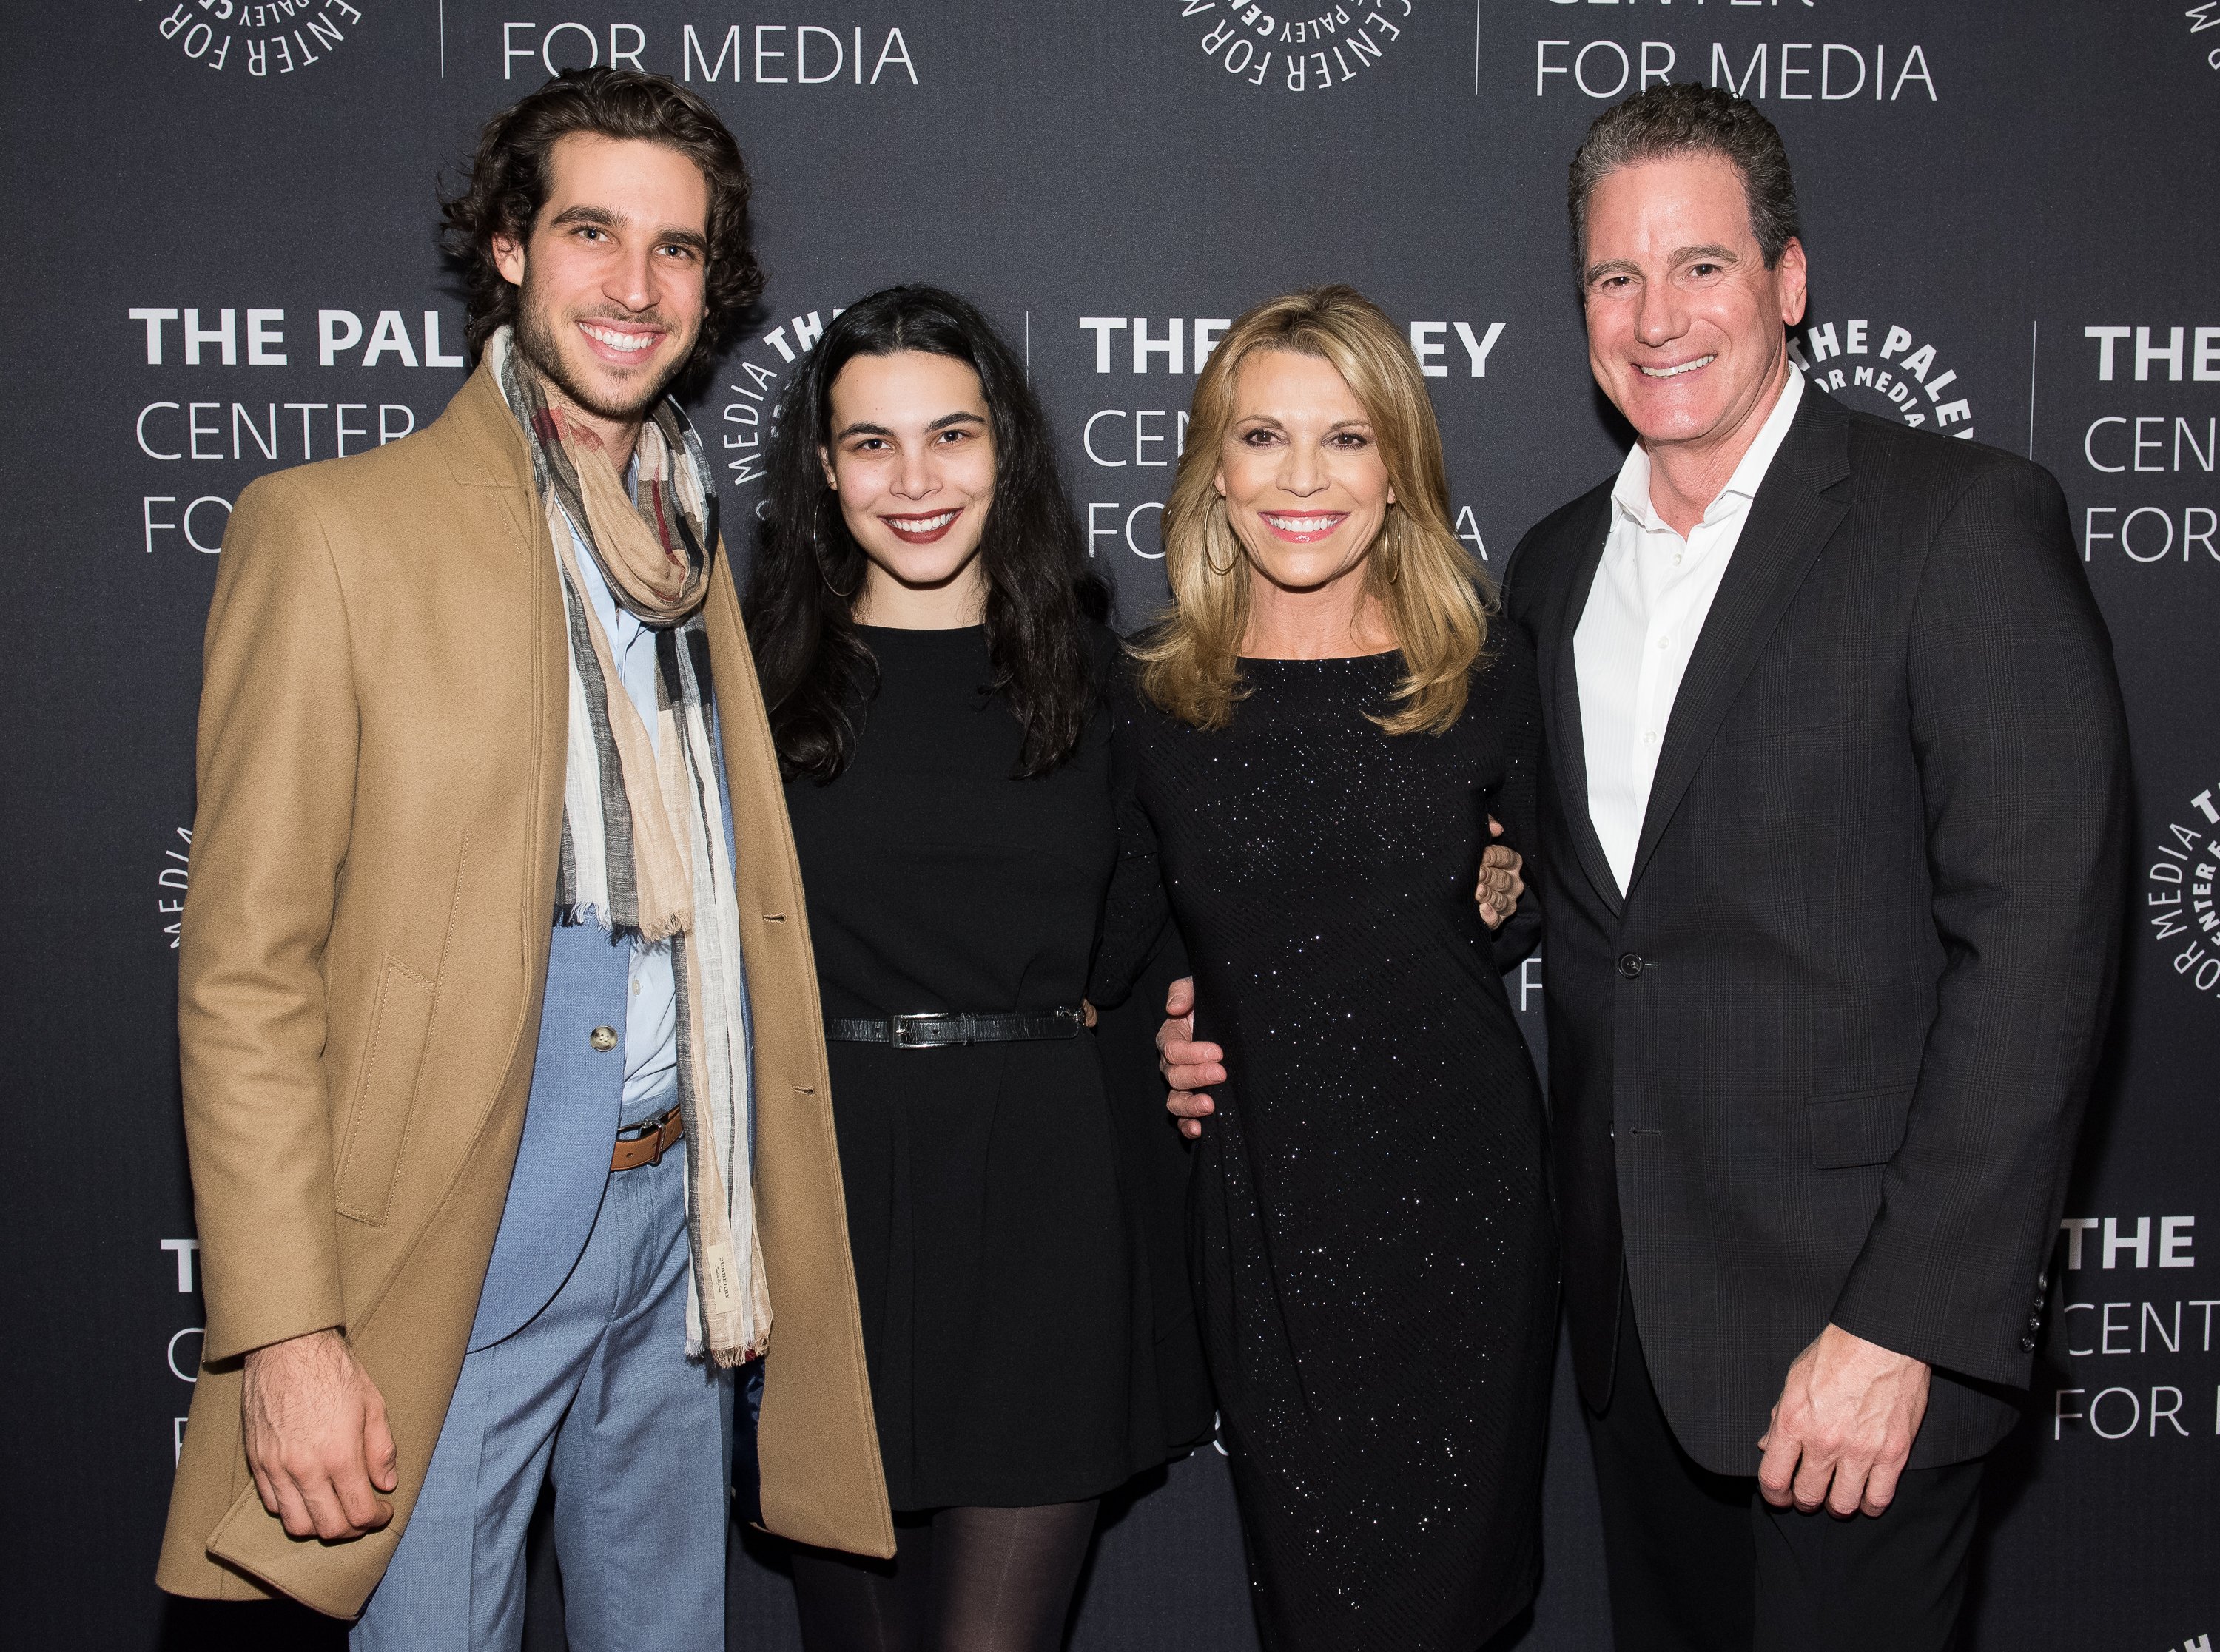 Nikko Santo Pietro, Gigi Santo Pietro, Vanna White, and George Santo Pietro attend The Paley Center For Media Presents: Wheel Of Fortune: 35 Years As America's Game at The Paley Center for Media on November 15, 2017, in New York City. | Source: Getty Images